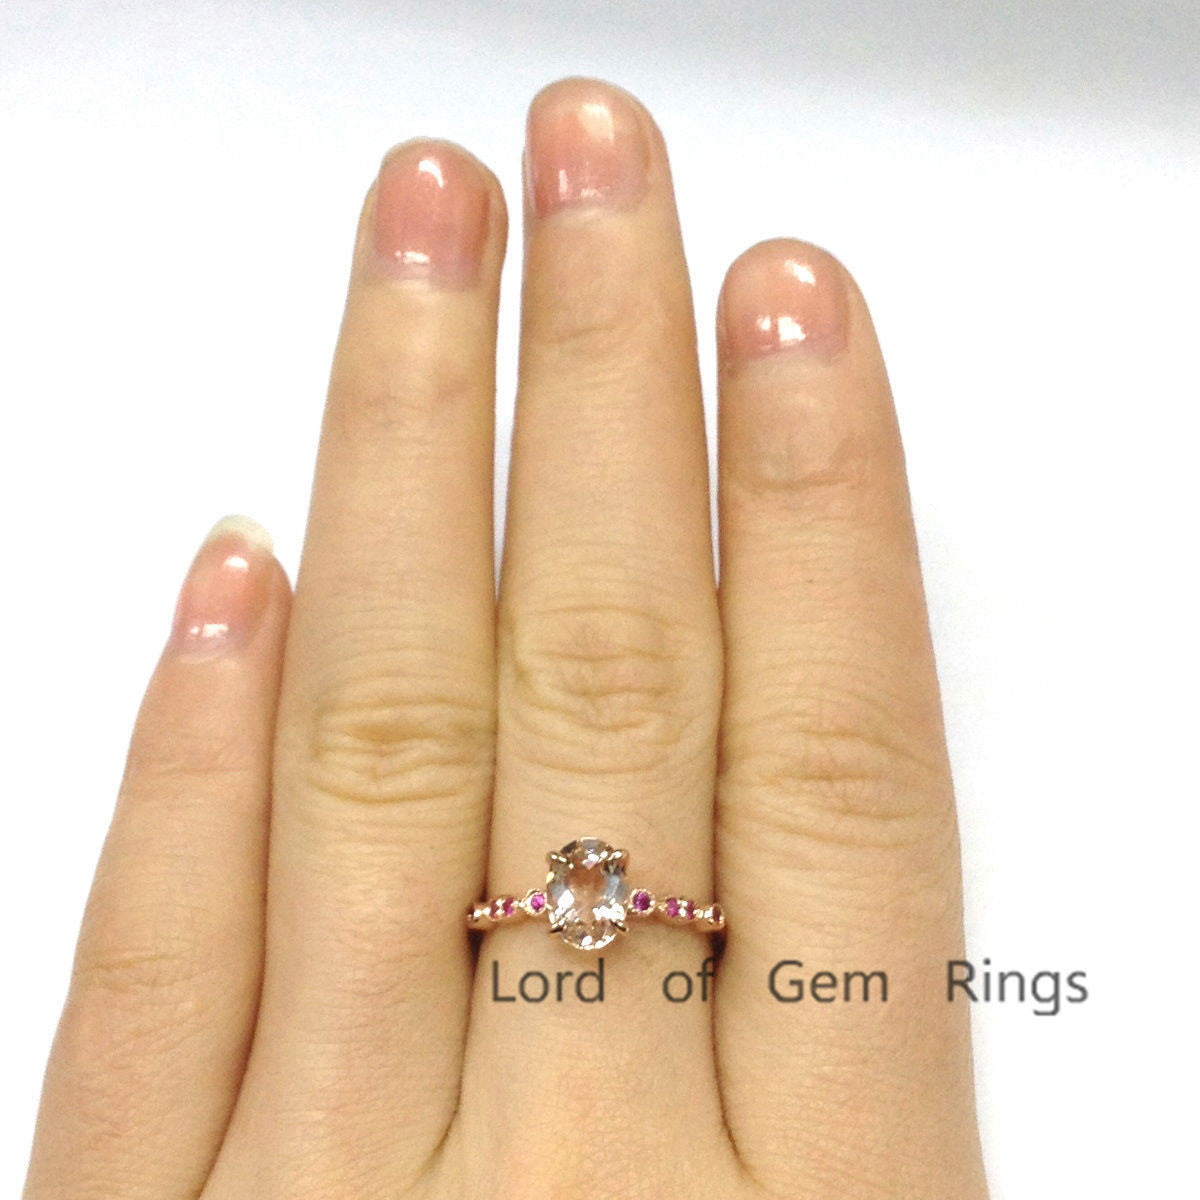 Oval Morganite Engagement Ring Pave Ruby Wedding 14K Rose Gold 6x8mm  Art Deco - Lord of Gem Rings - 4